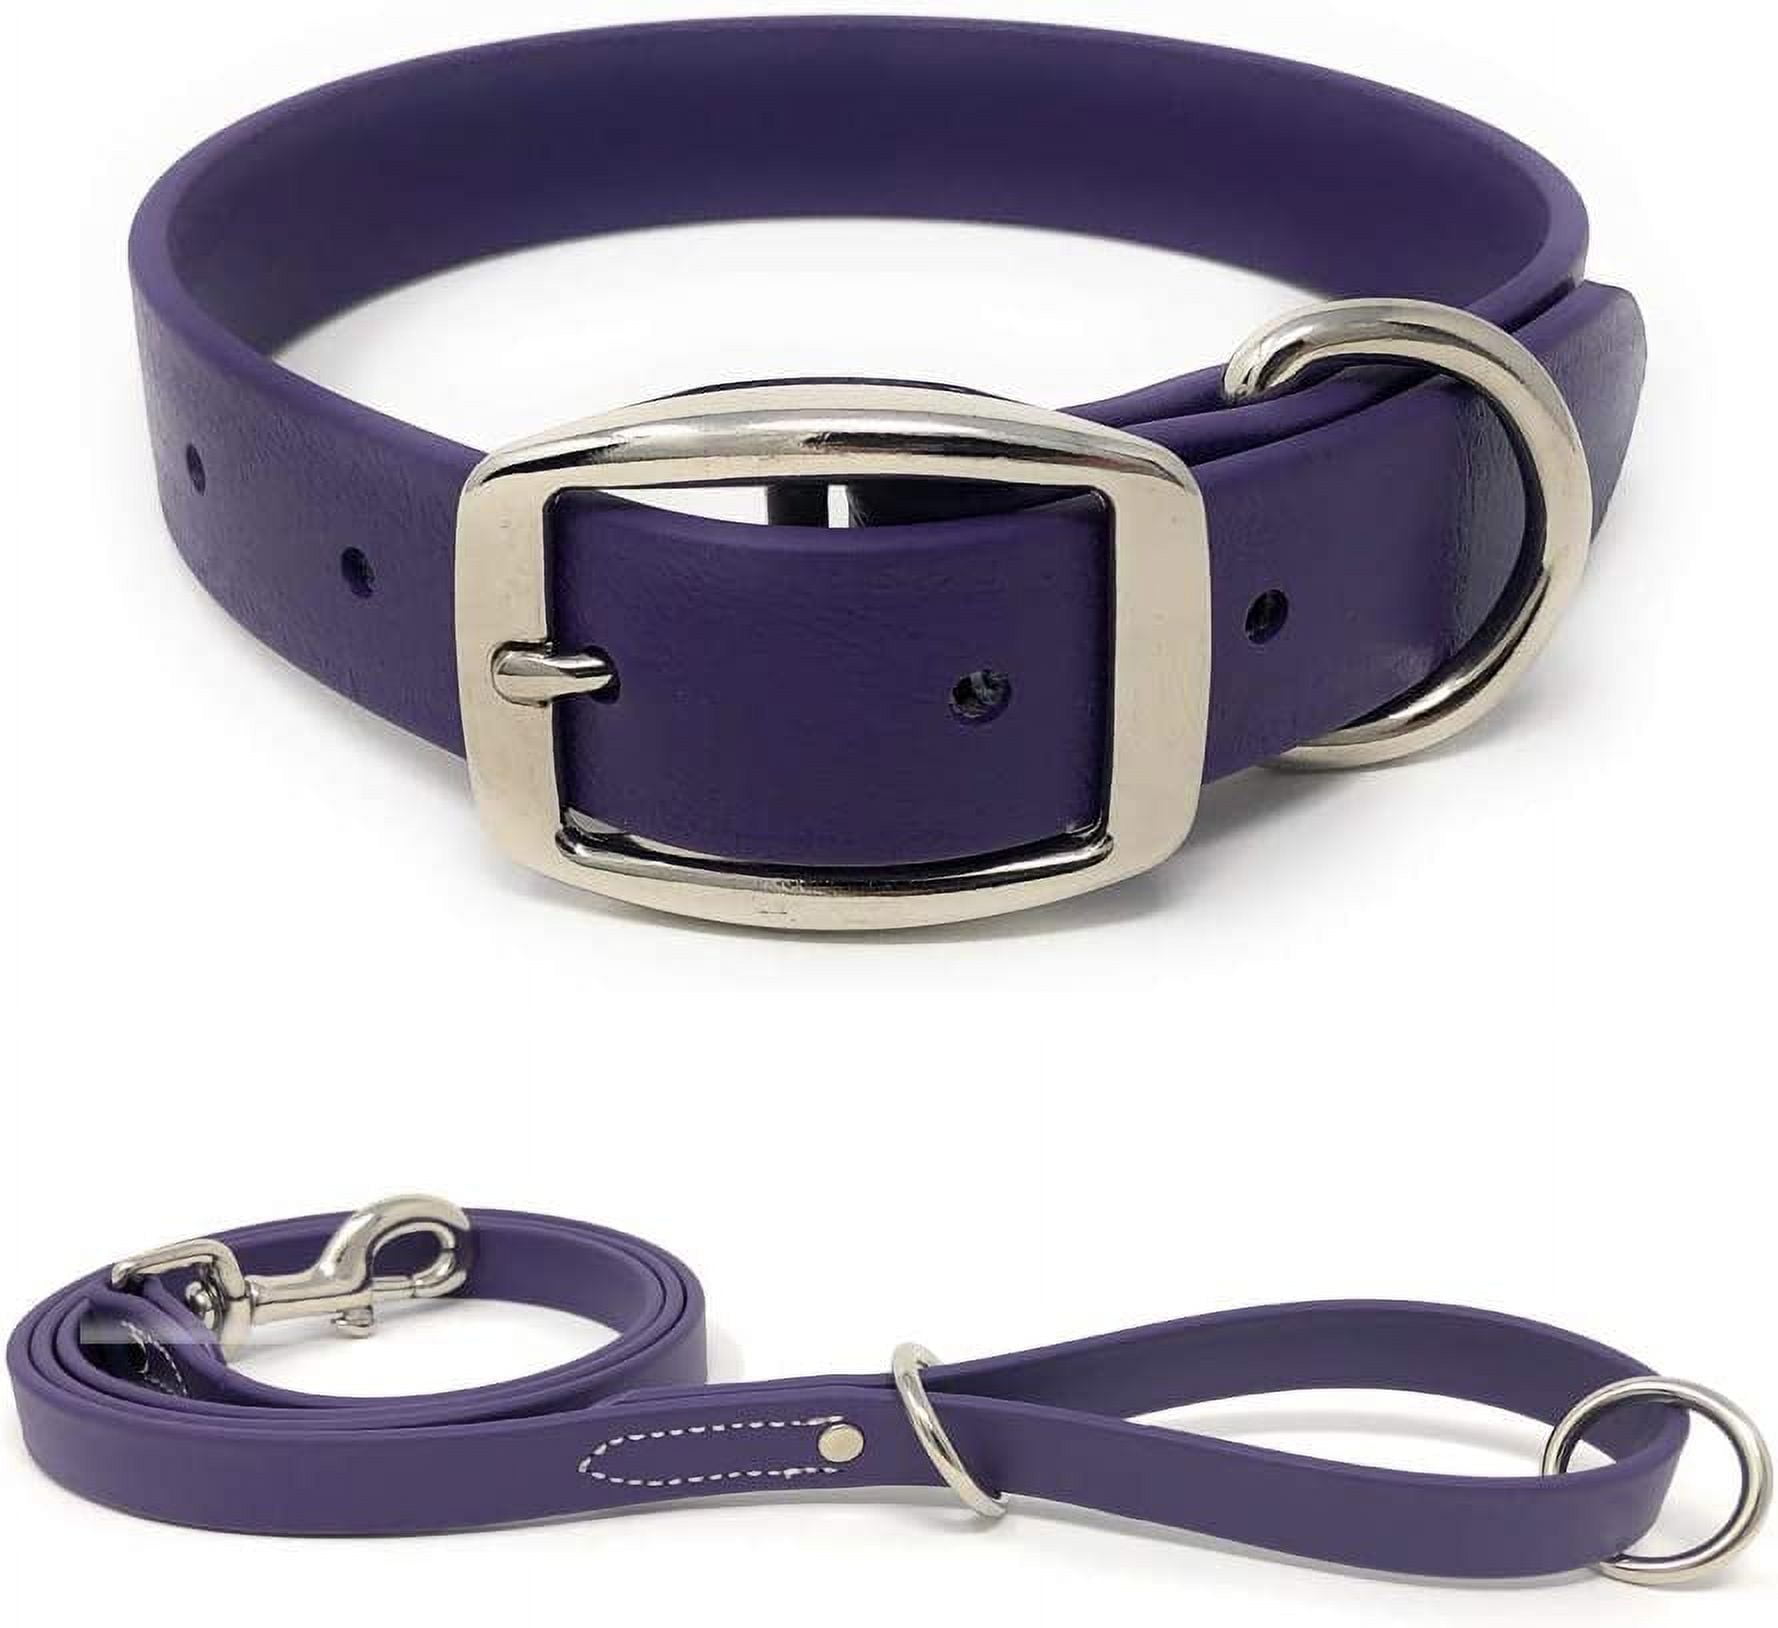  Regal Dog Products Nylon Dog Collar with Metal Buckle, for  Small, Medium, and Large Dogs, Blue Collar for Male Dog